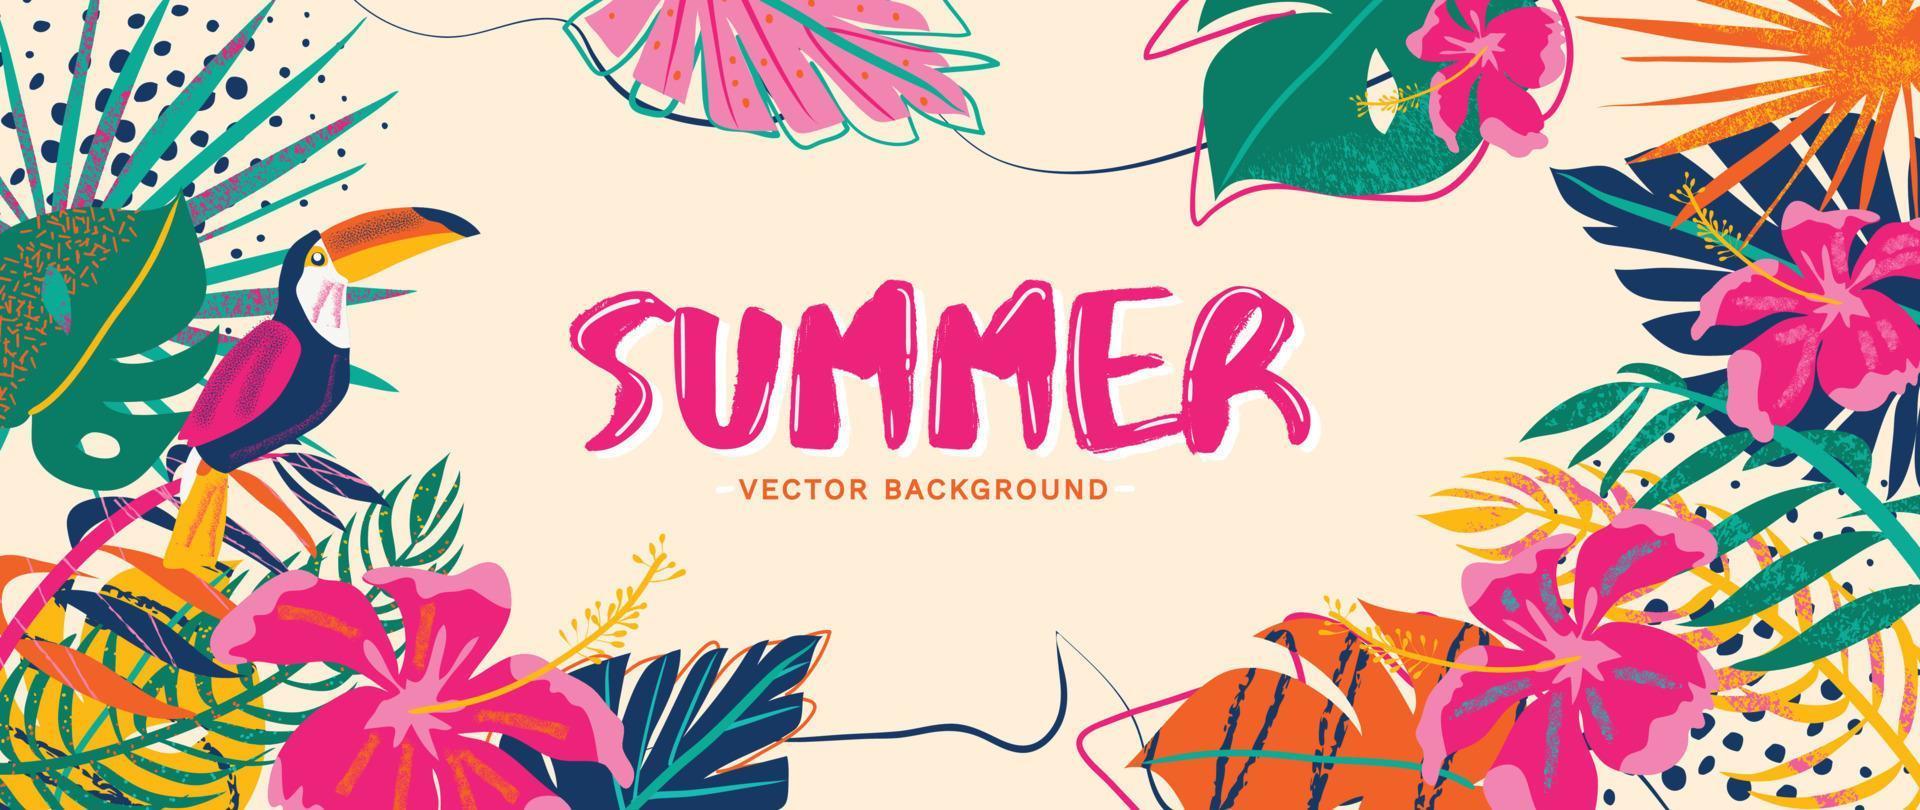 Summer tropical jungle background vector. Colorful botanical with exotic plants, hornbill, hibiscus flowers, palm leaf, grunge texture. Happy summertime illustration for poster, cover, banner, prints. vector